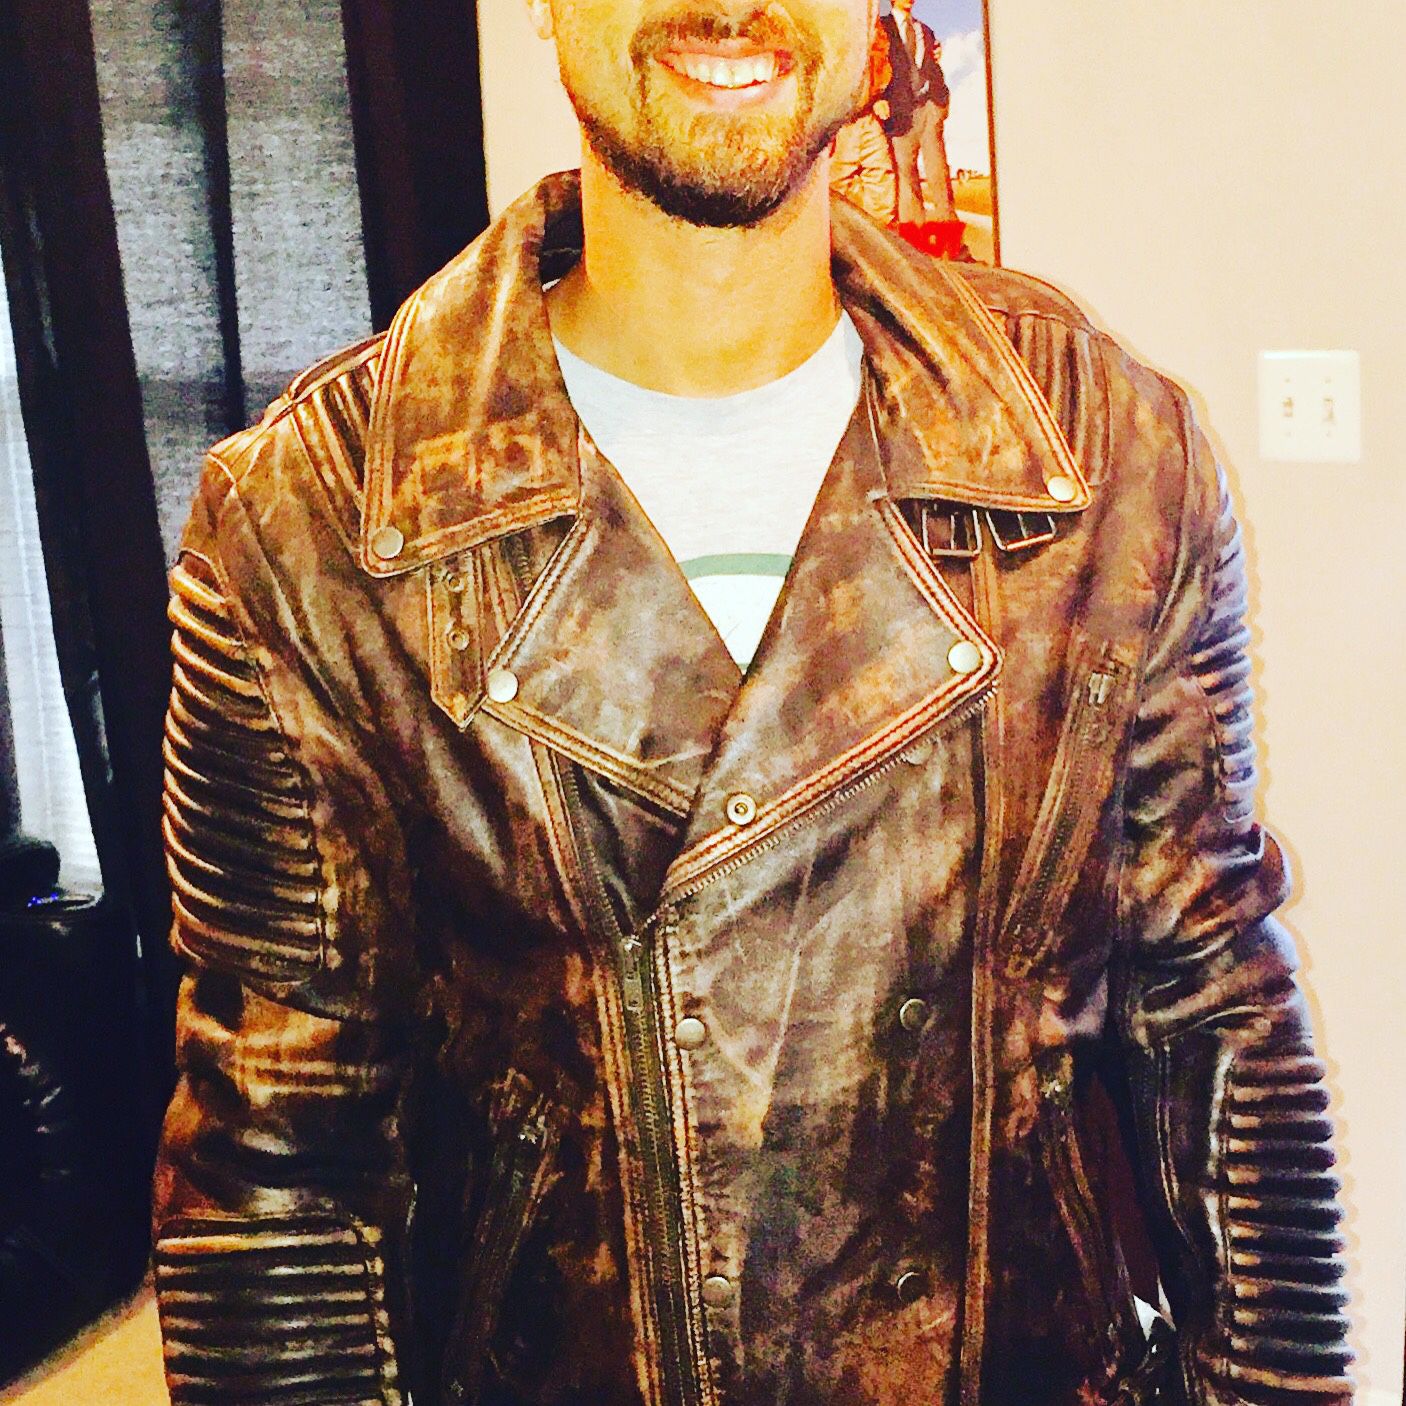 LZF/KL/ real vintage lambskin leather jacket, buy one get another for free for a limited time online only